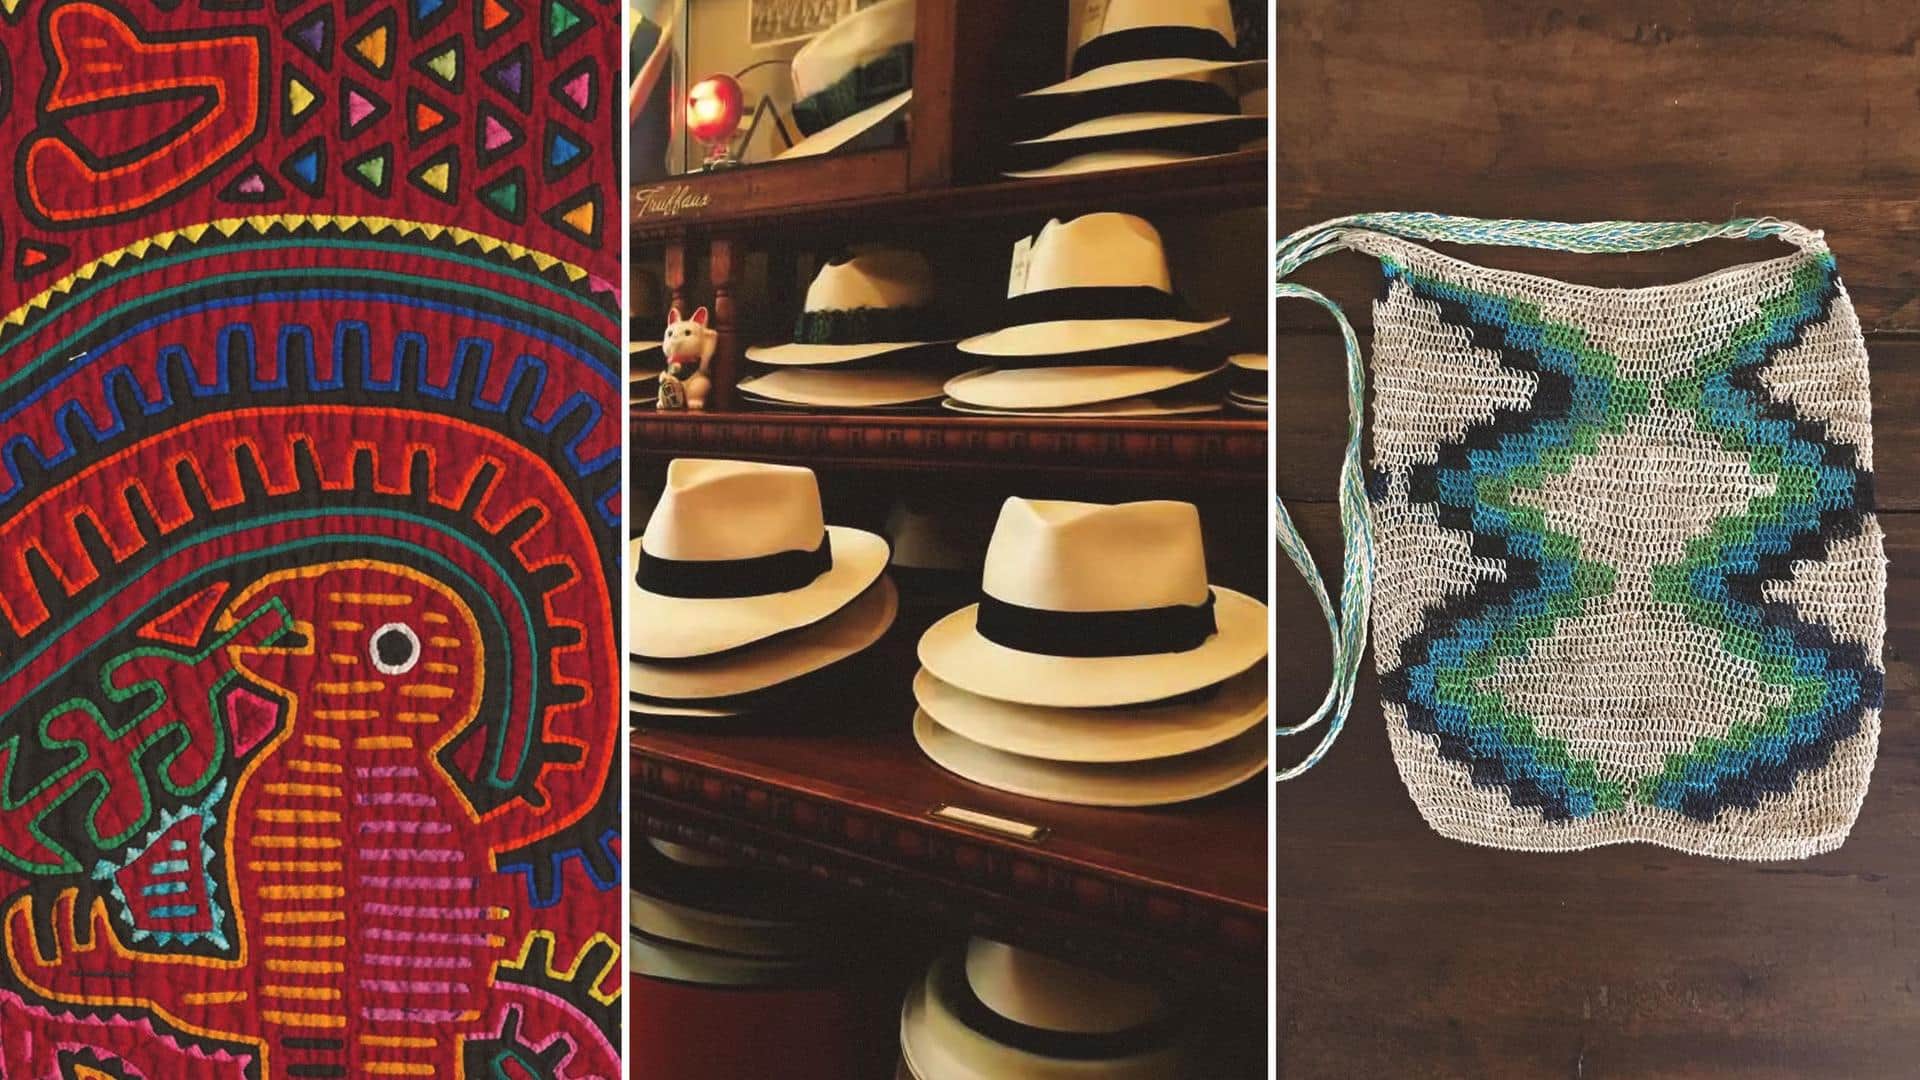 Panama calling? Don't forget to get home these souvenirs